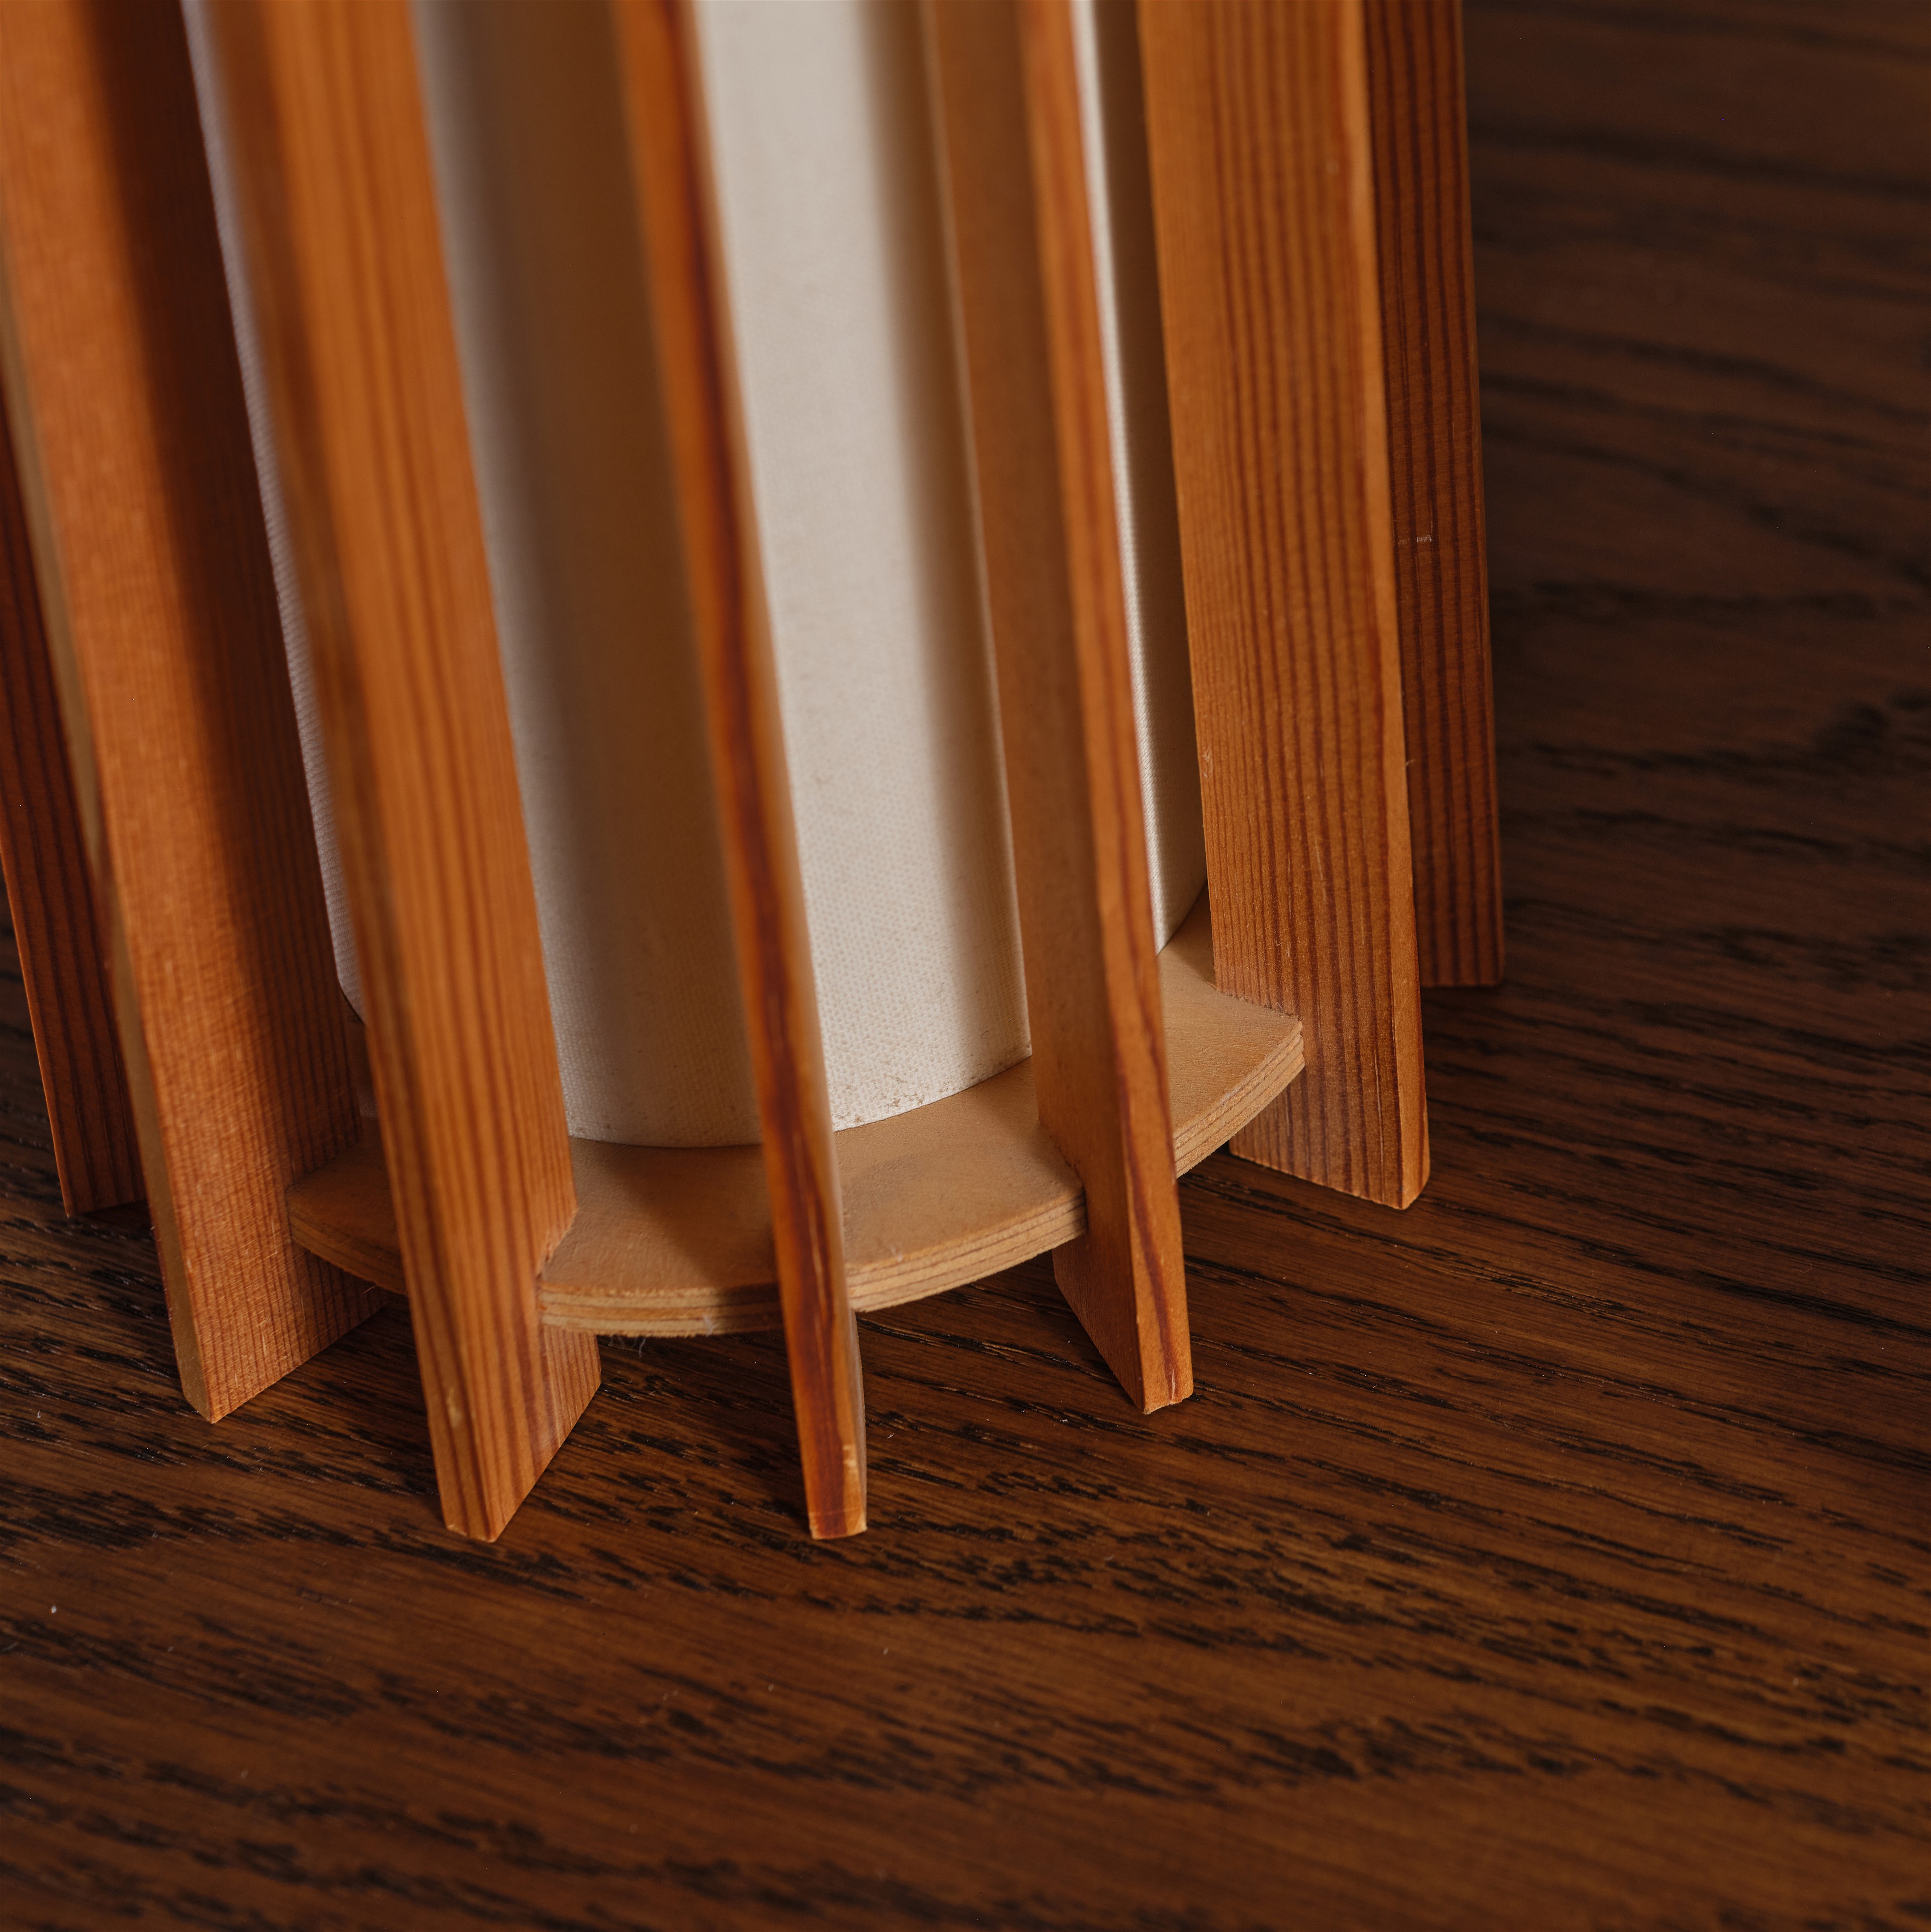 a close up of a wooden pole on a wooden floor